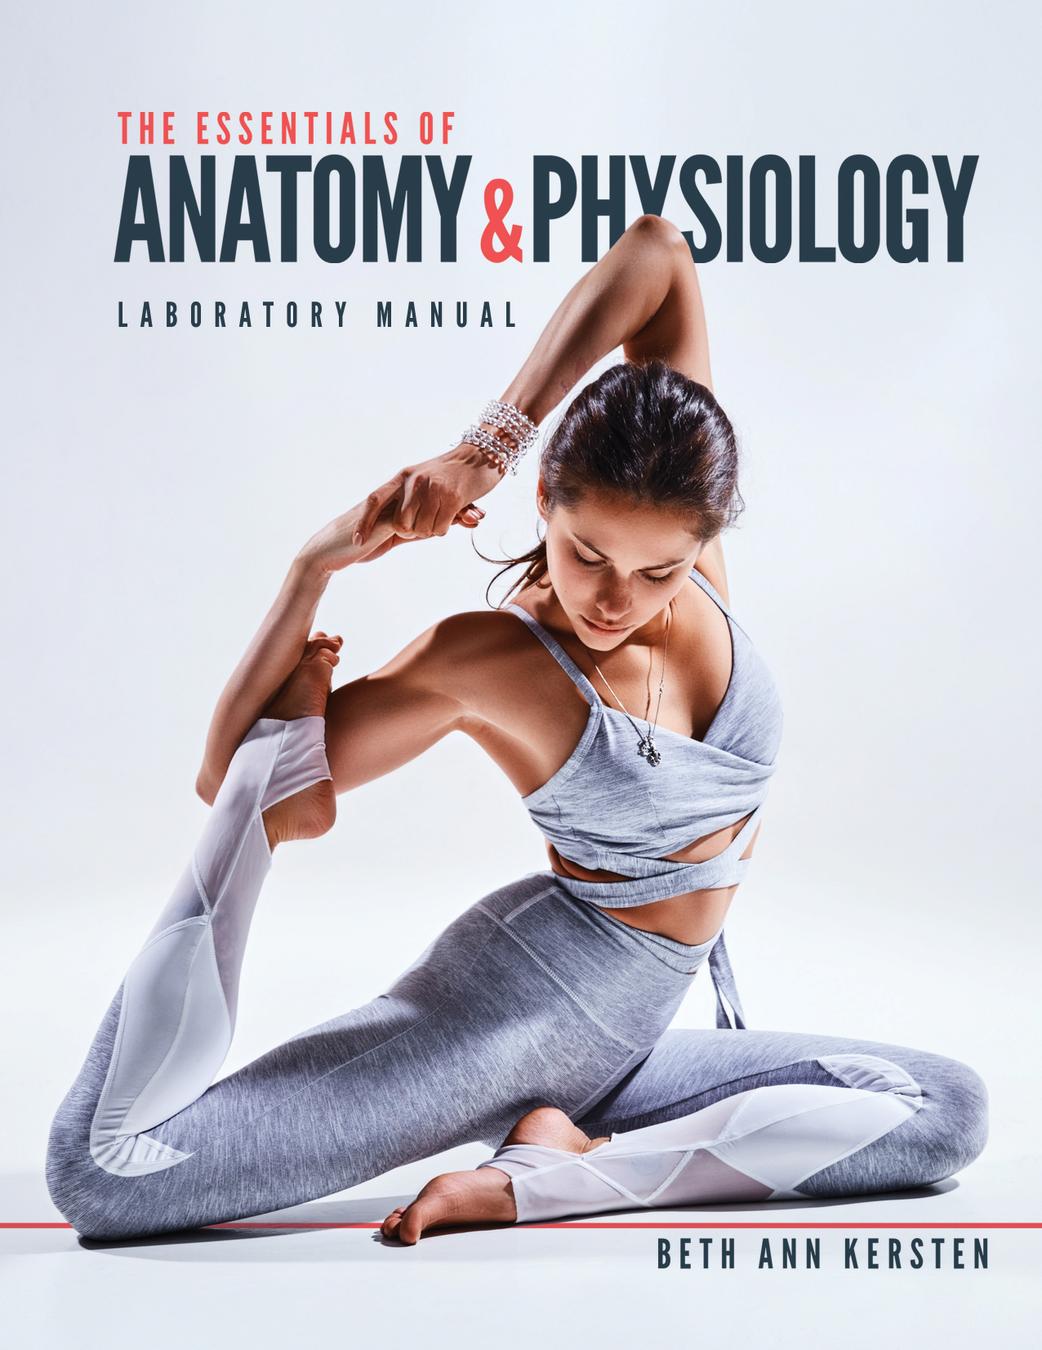 The Essentials of Anatomy and Physiology Laboratory Manual cover photo